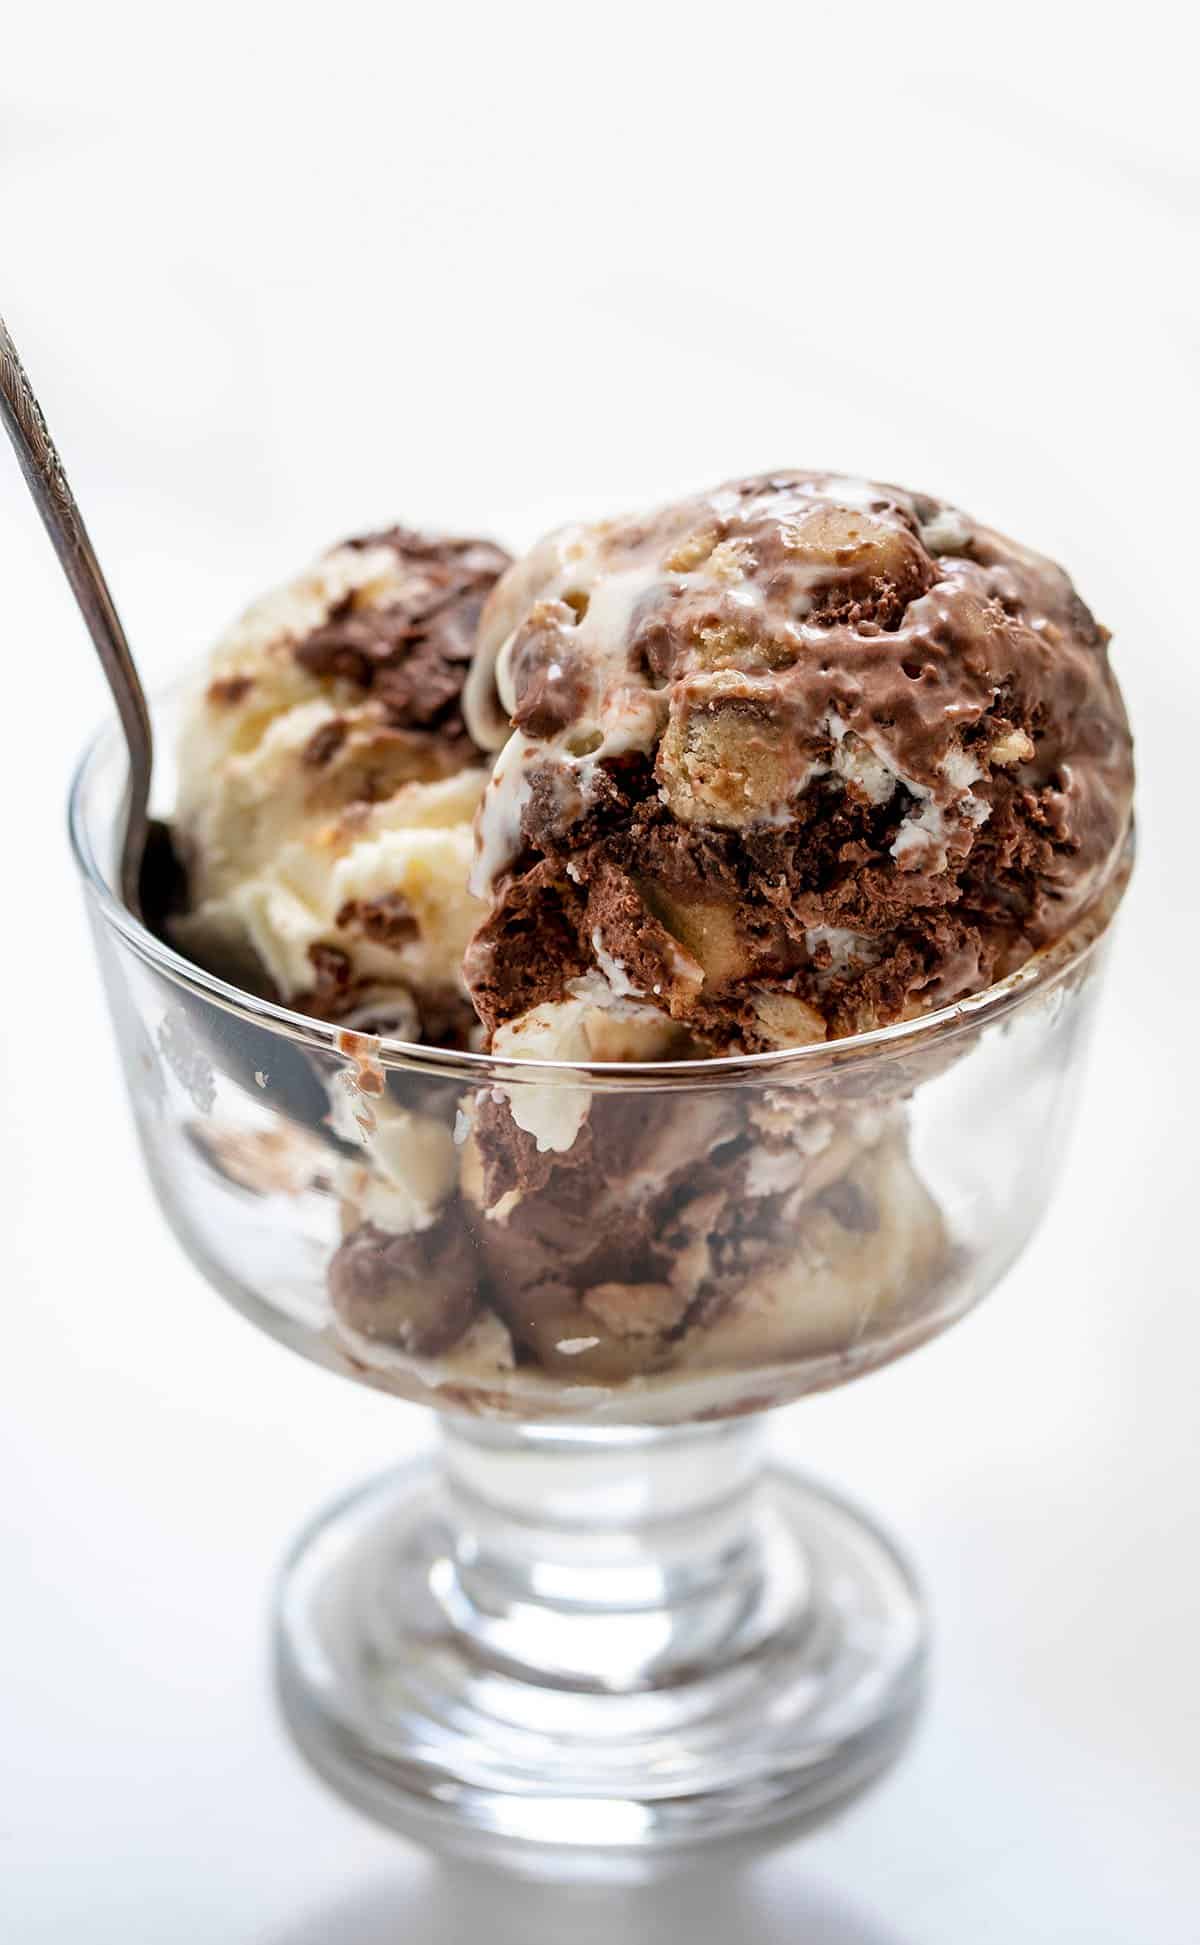 Scoops of Cookie Dough Brownie Ice Cream in a Glass Bowl.